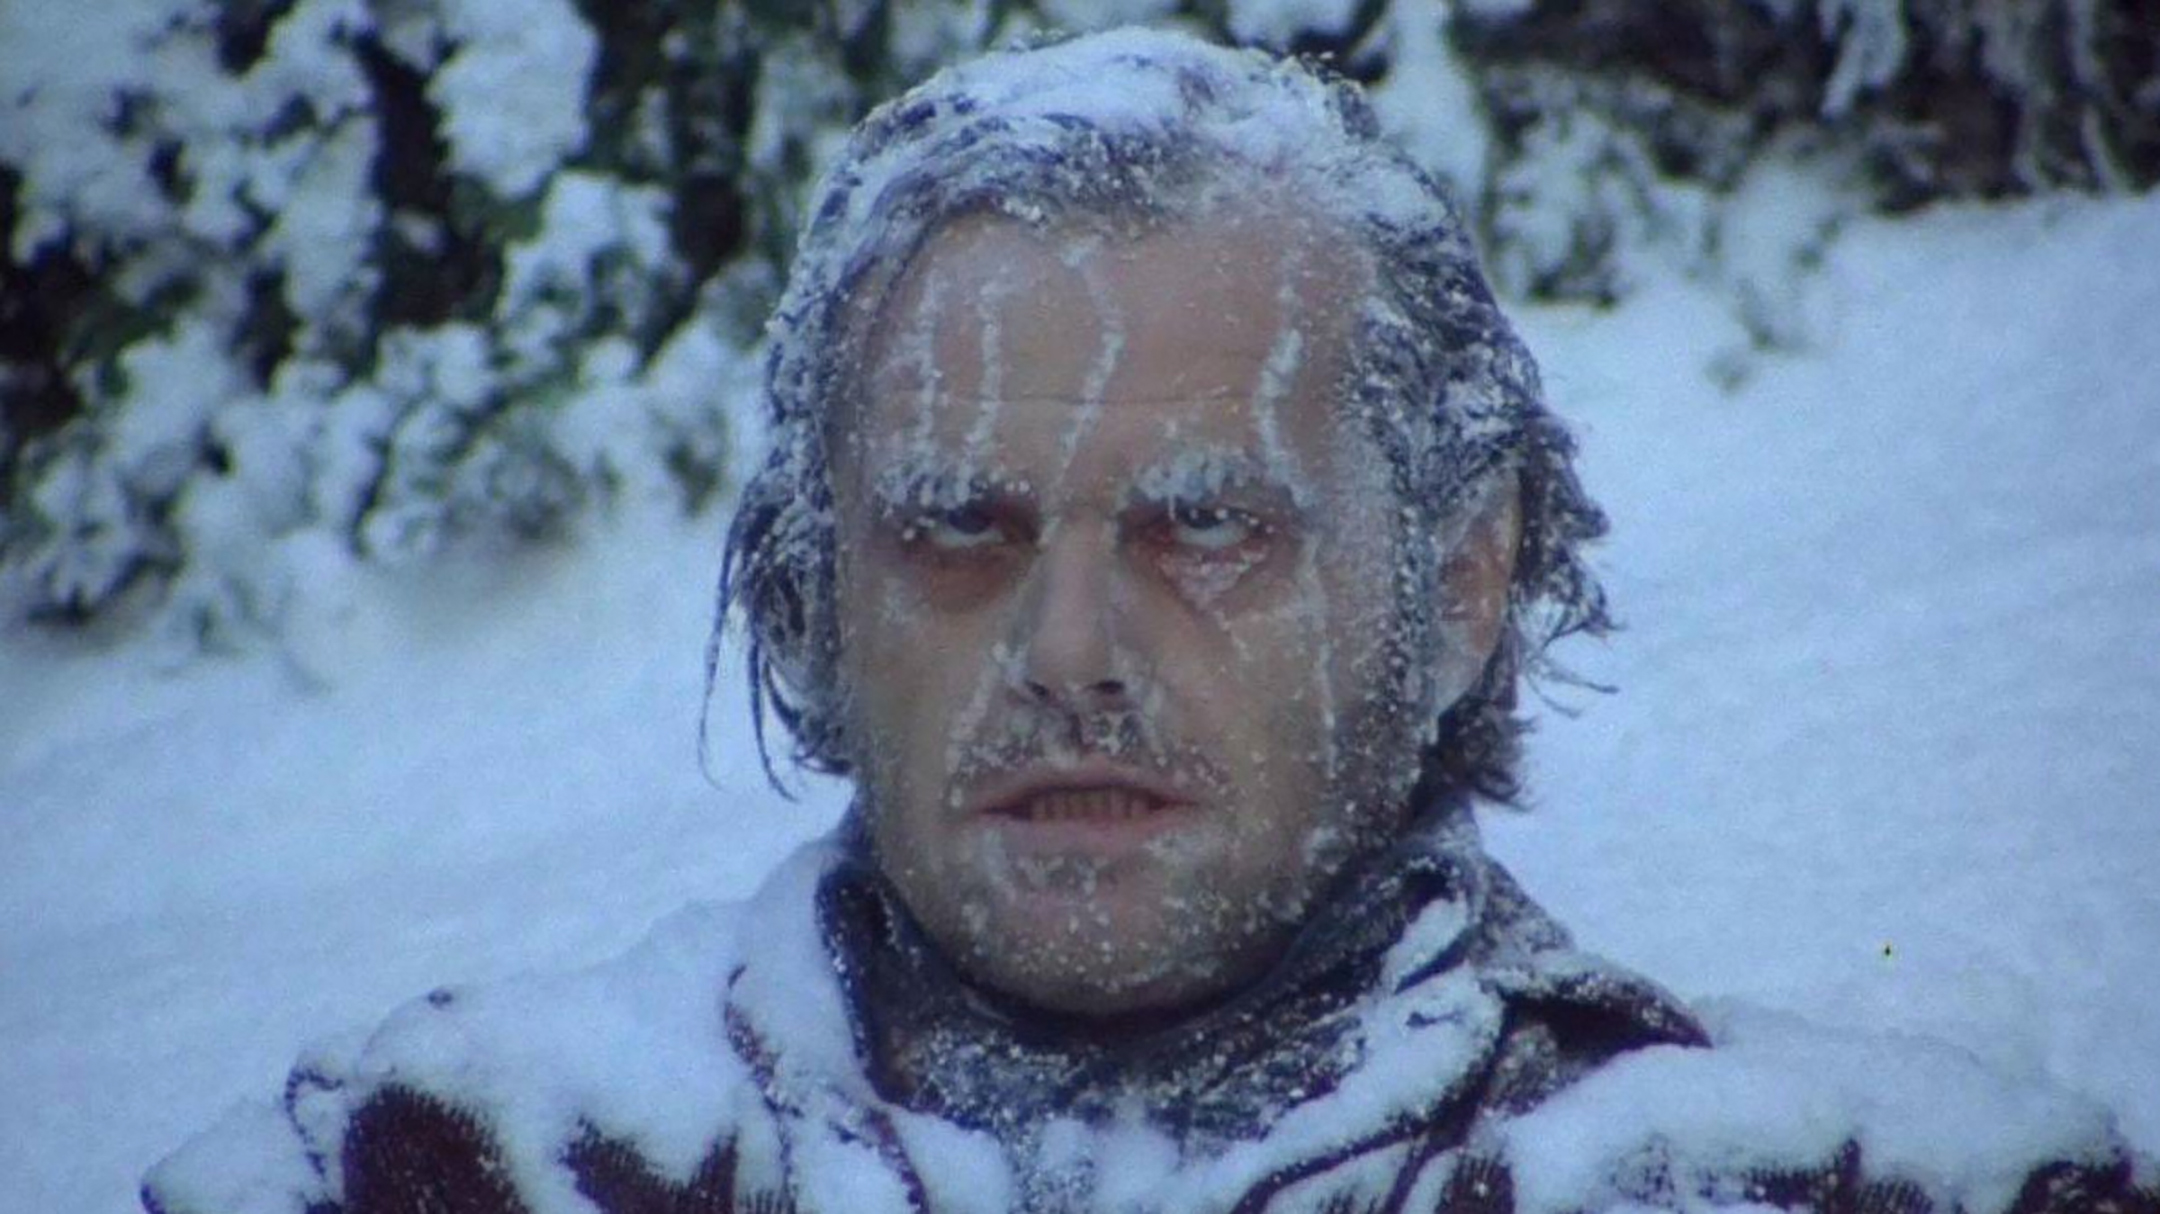 Still from the movie The Shining showing a frozen Jack Nicholson